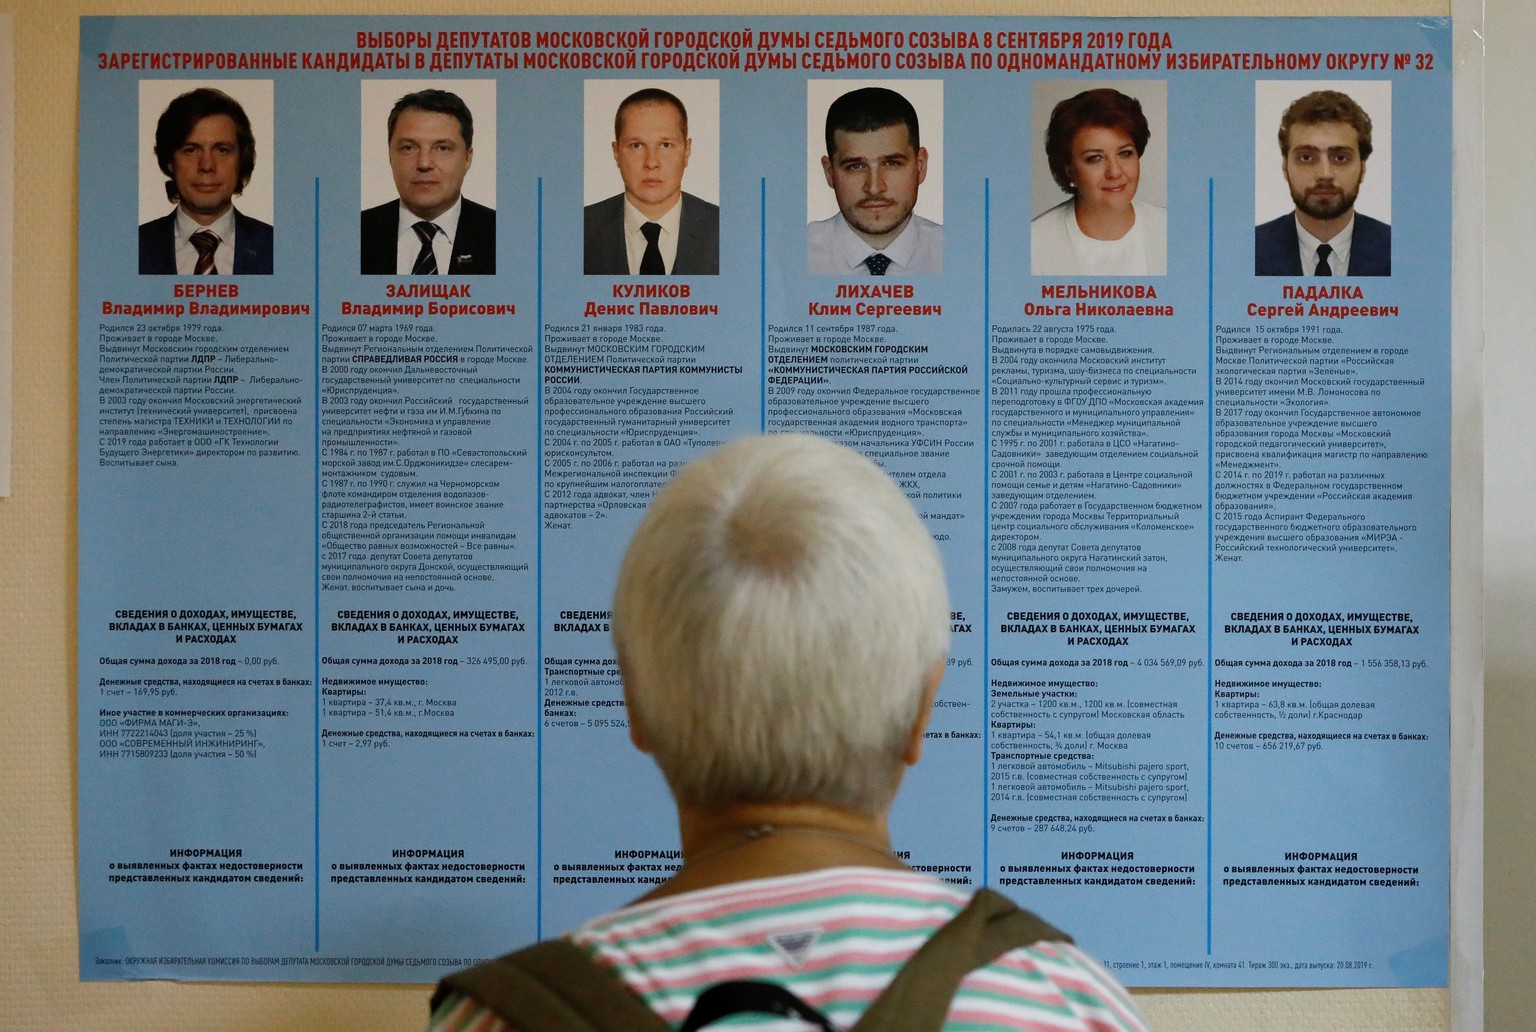 A voter studies a candidate information broadsheet at a polling station during the Moscow city parliament election in Moscow, Russia September 8, 2019. REUTERS/Shamil Zhumatov